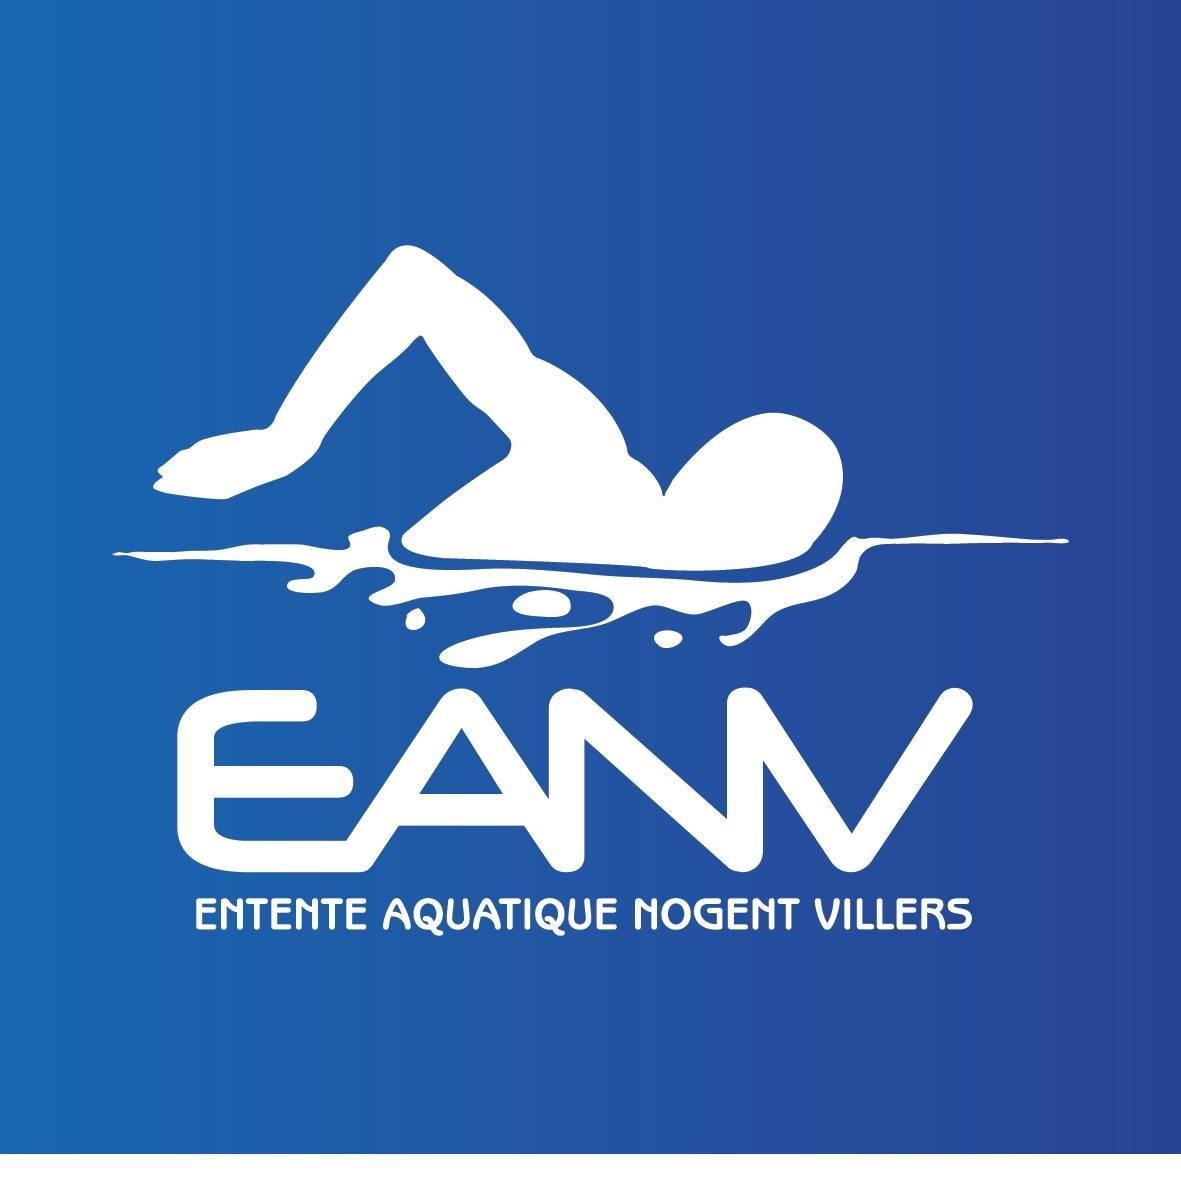 You are currently viewing Entente Aquatique Nogent Villers